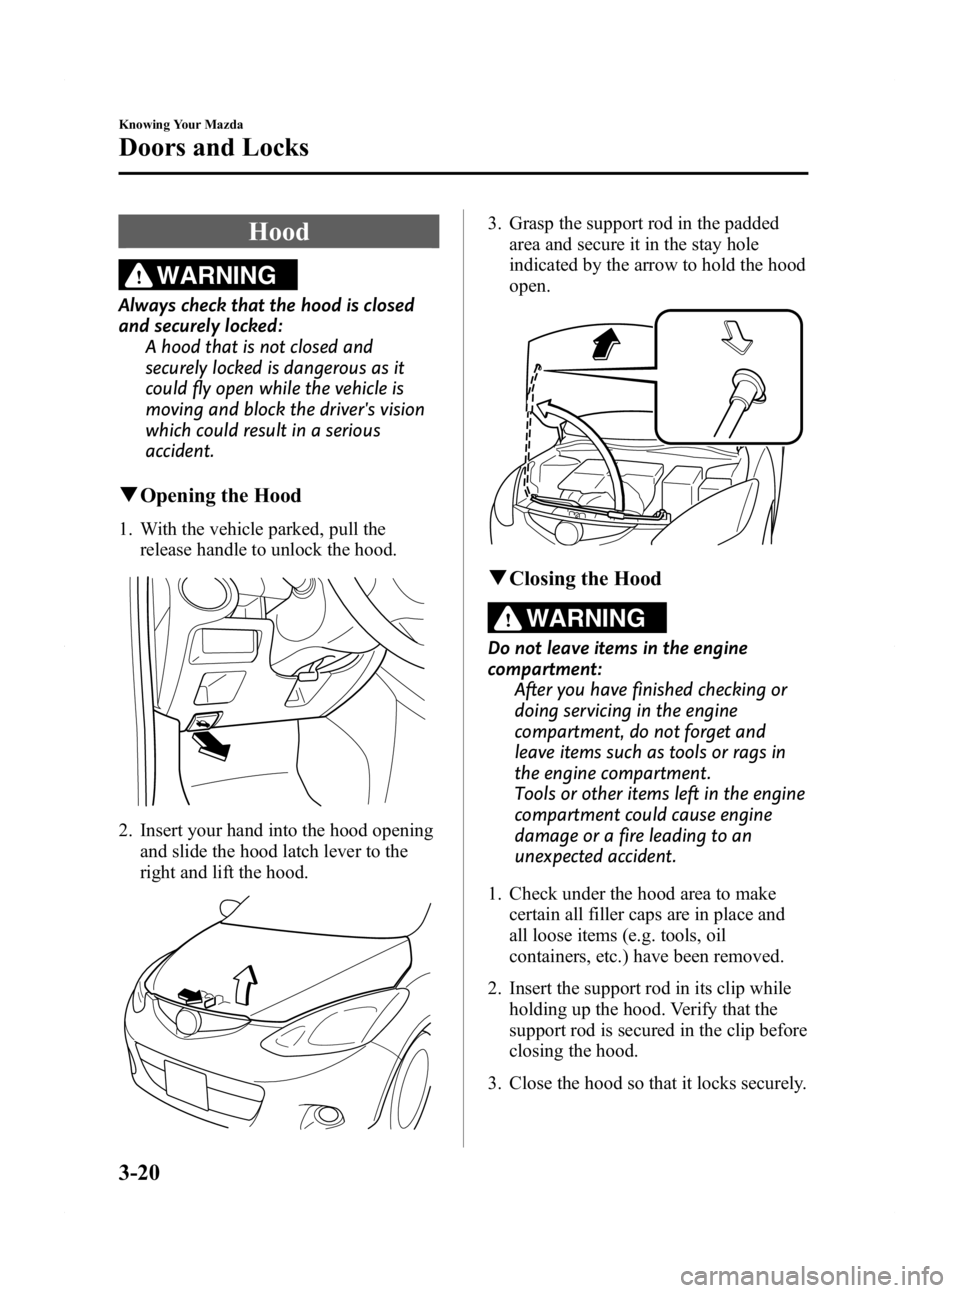 MAZDA MODEL 2 2011  Owners Manual Black plate (88,1)
Hood
WARNING
Always check that the hood is closed
and securely locked:A hood that is not closed and
securely locked is dangerous as it
could fly open while the vehicle is
moving and